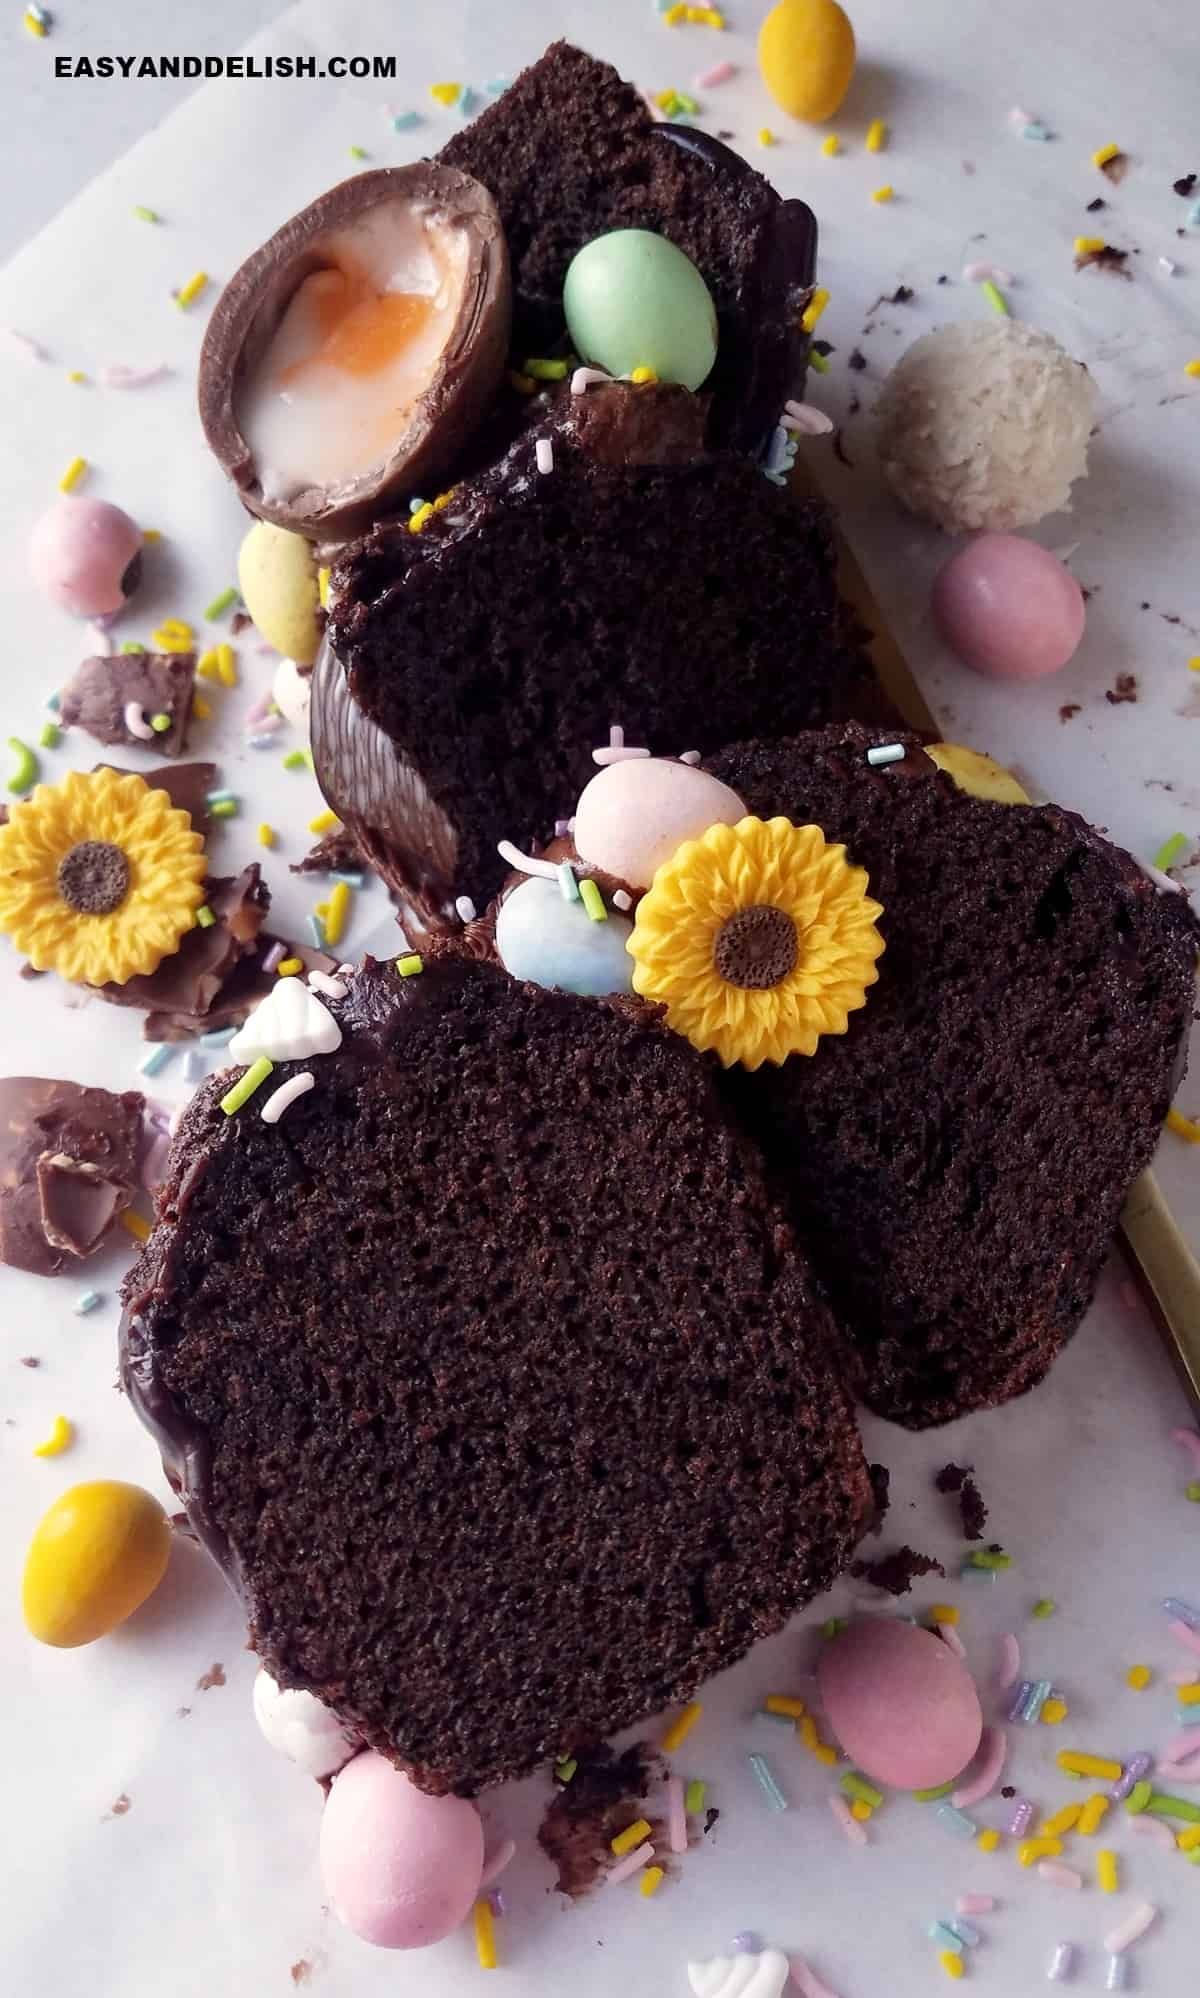 several slices of Chocolate Easter bundt cake with decorations on top.